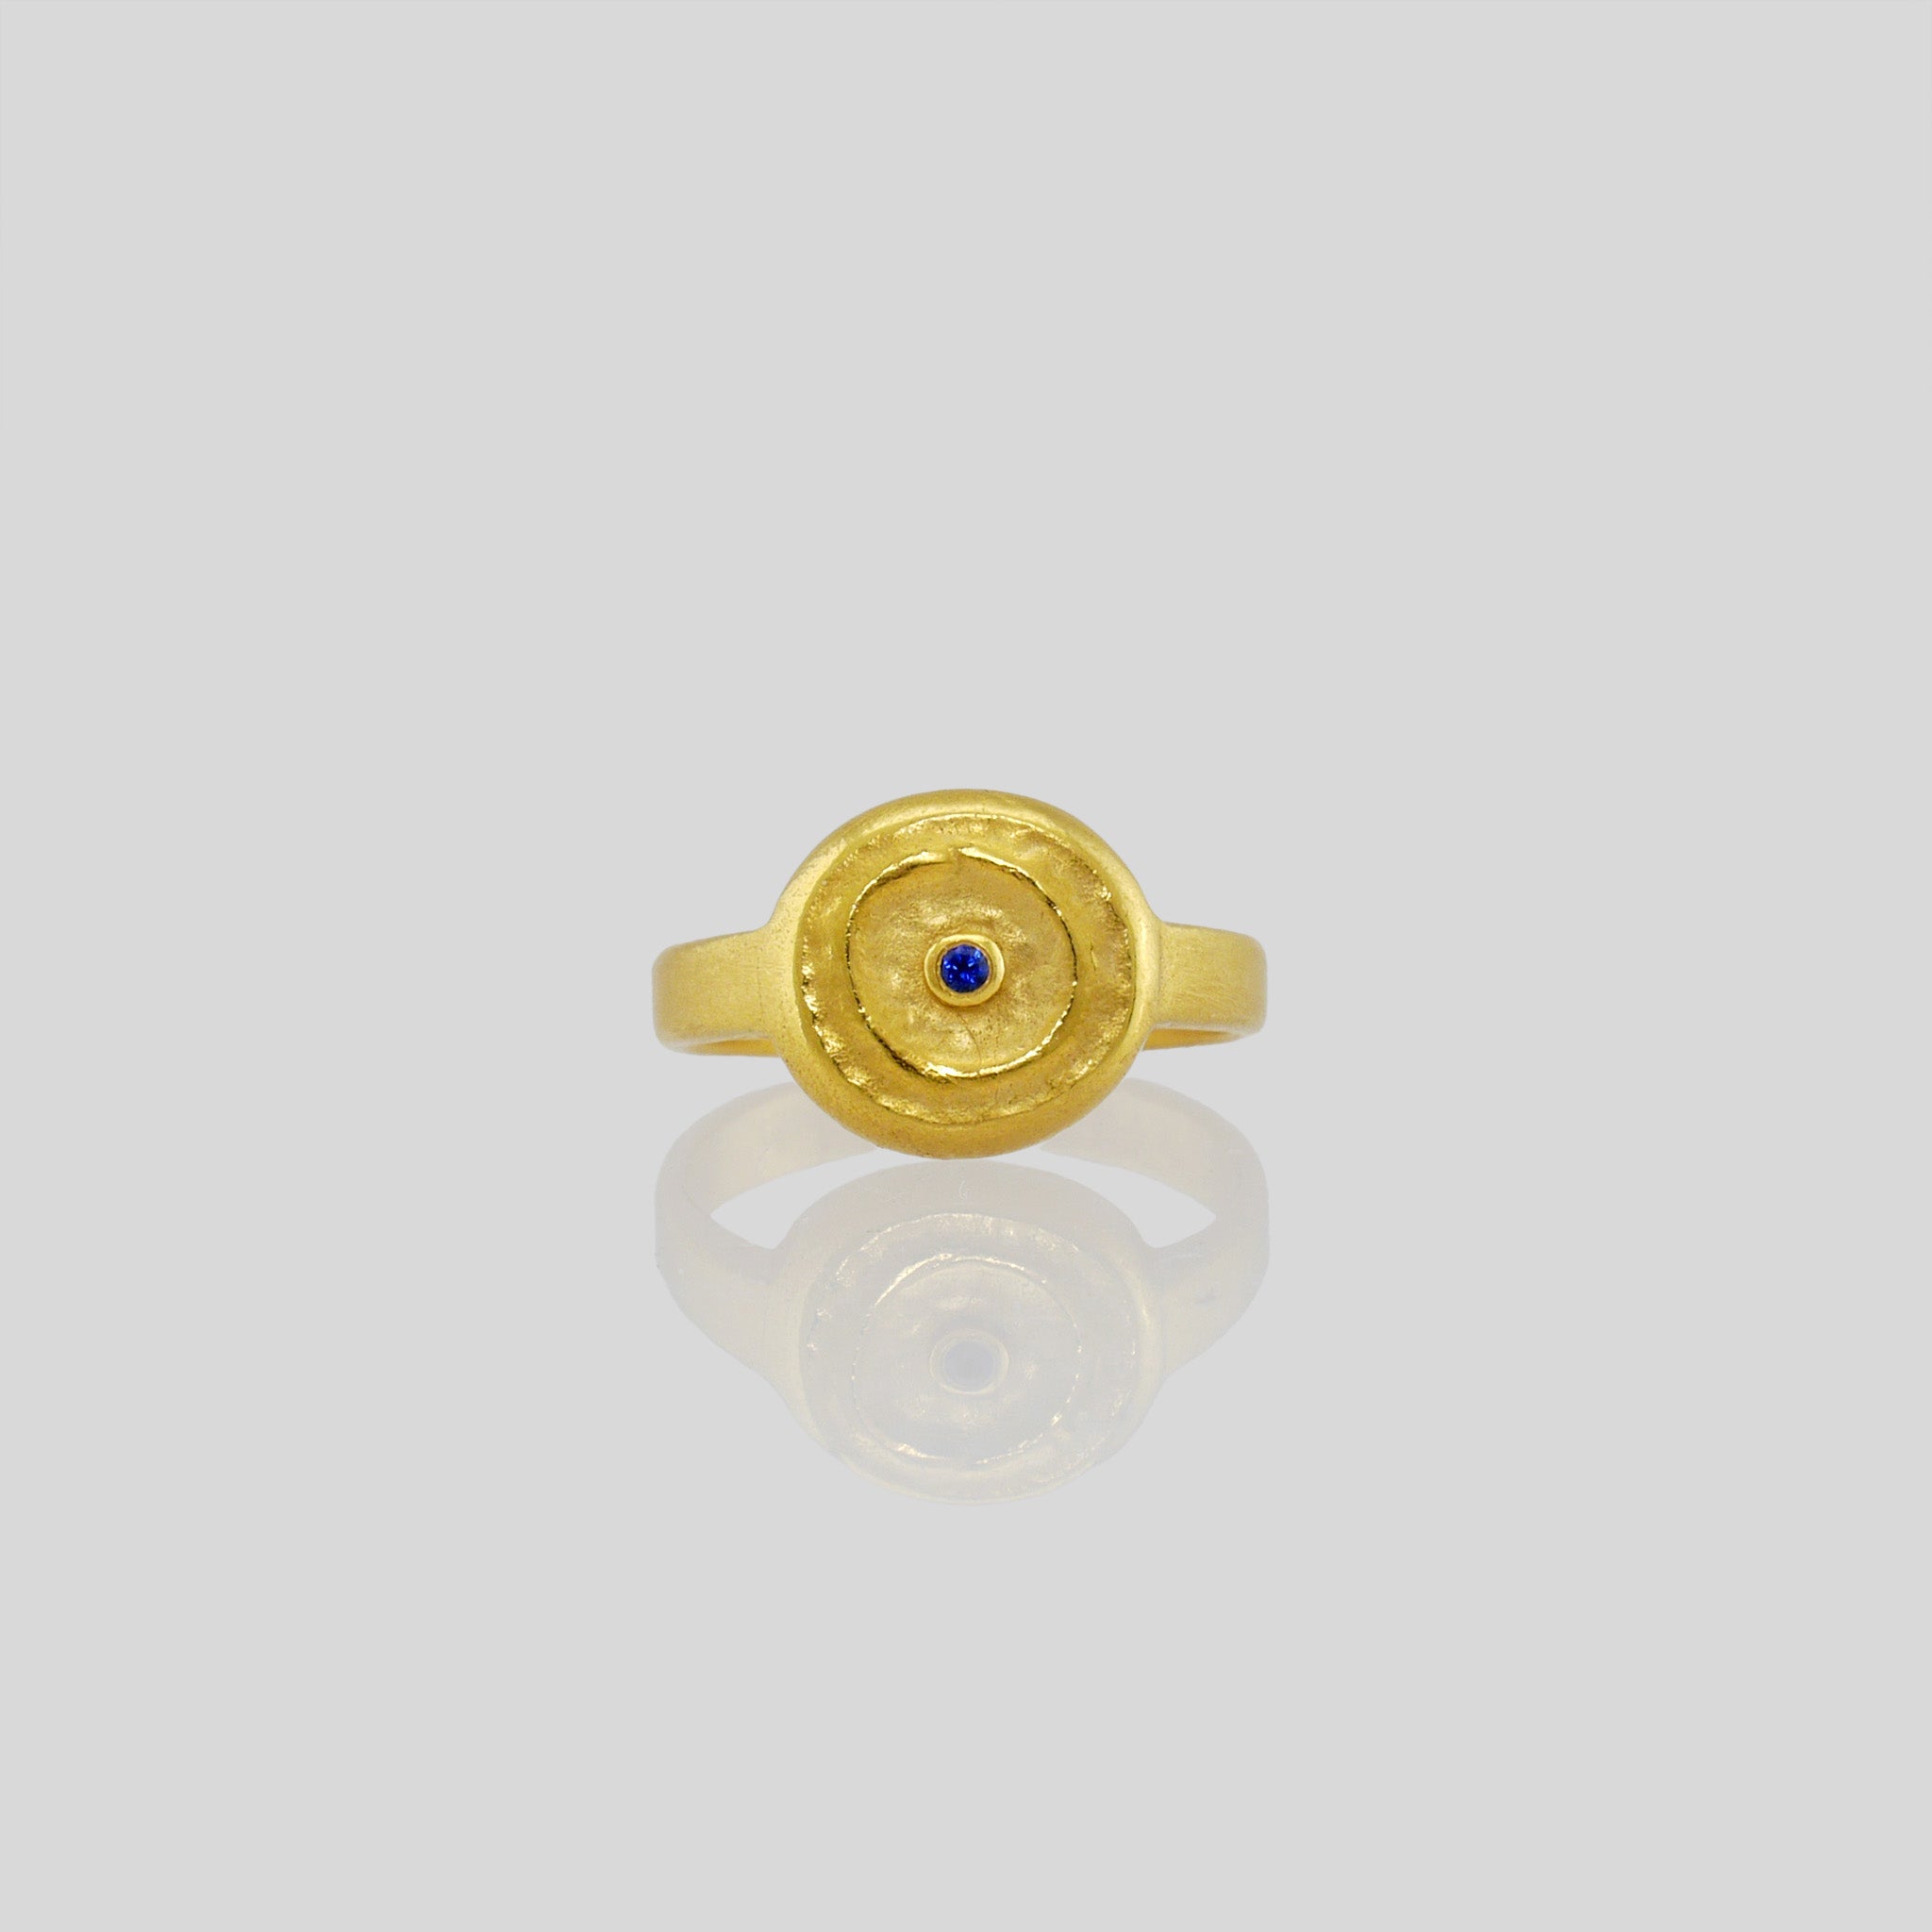 Front view of Handmade 18k Gold ring with a central Sapphire, exuding vintage charm reminiscent of the Egyptian pharaohs' era.